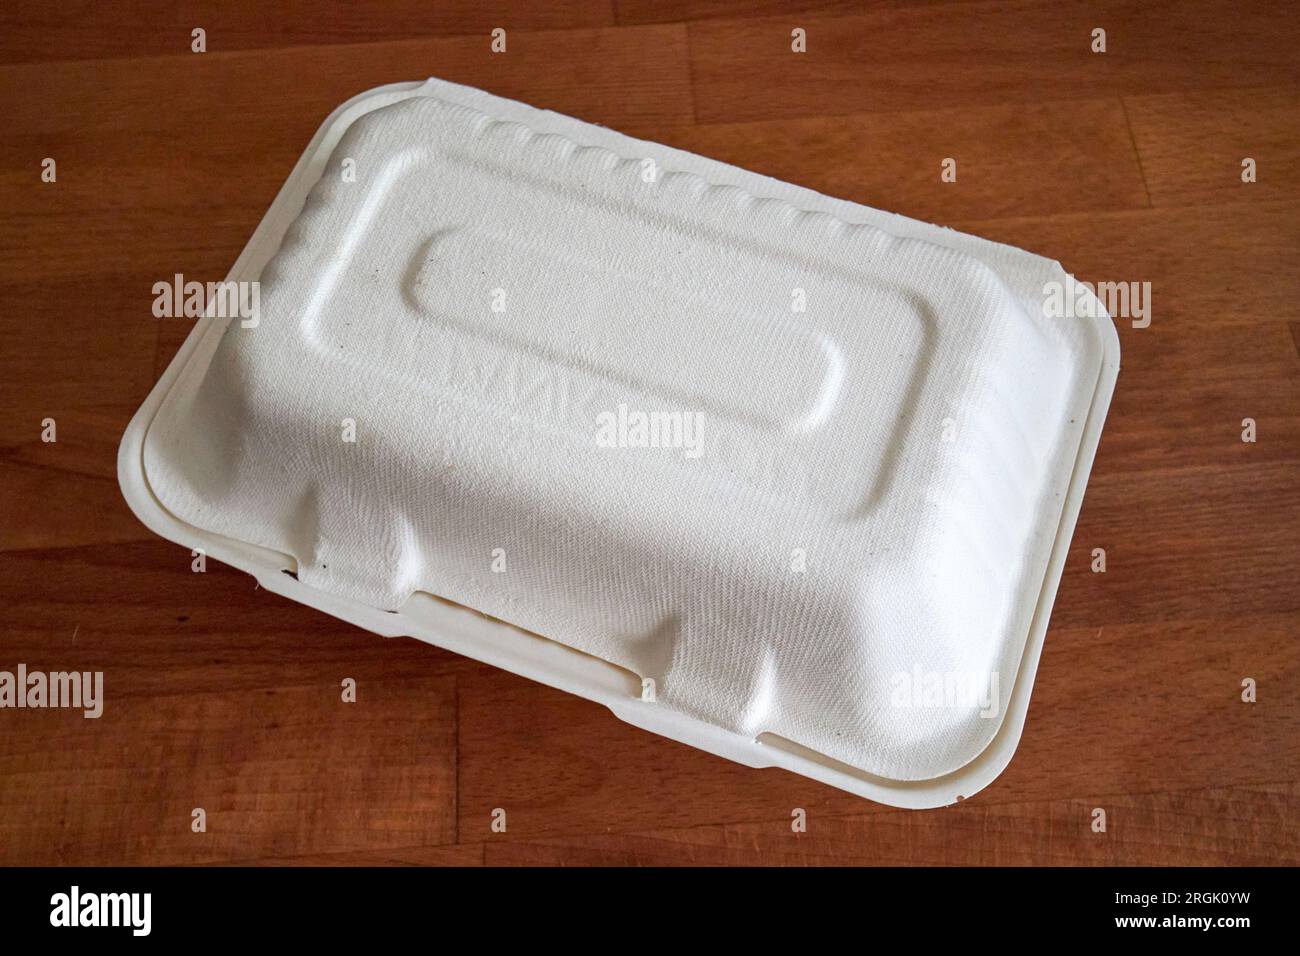 new biodegradable food packaging uk which replaces the old plastic based food tray clam boxes Stock Photo